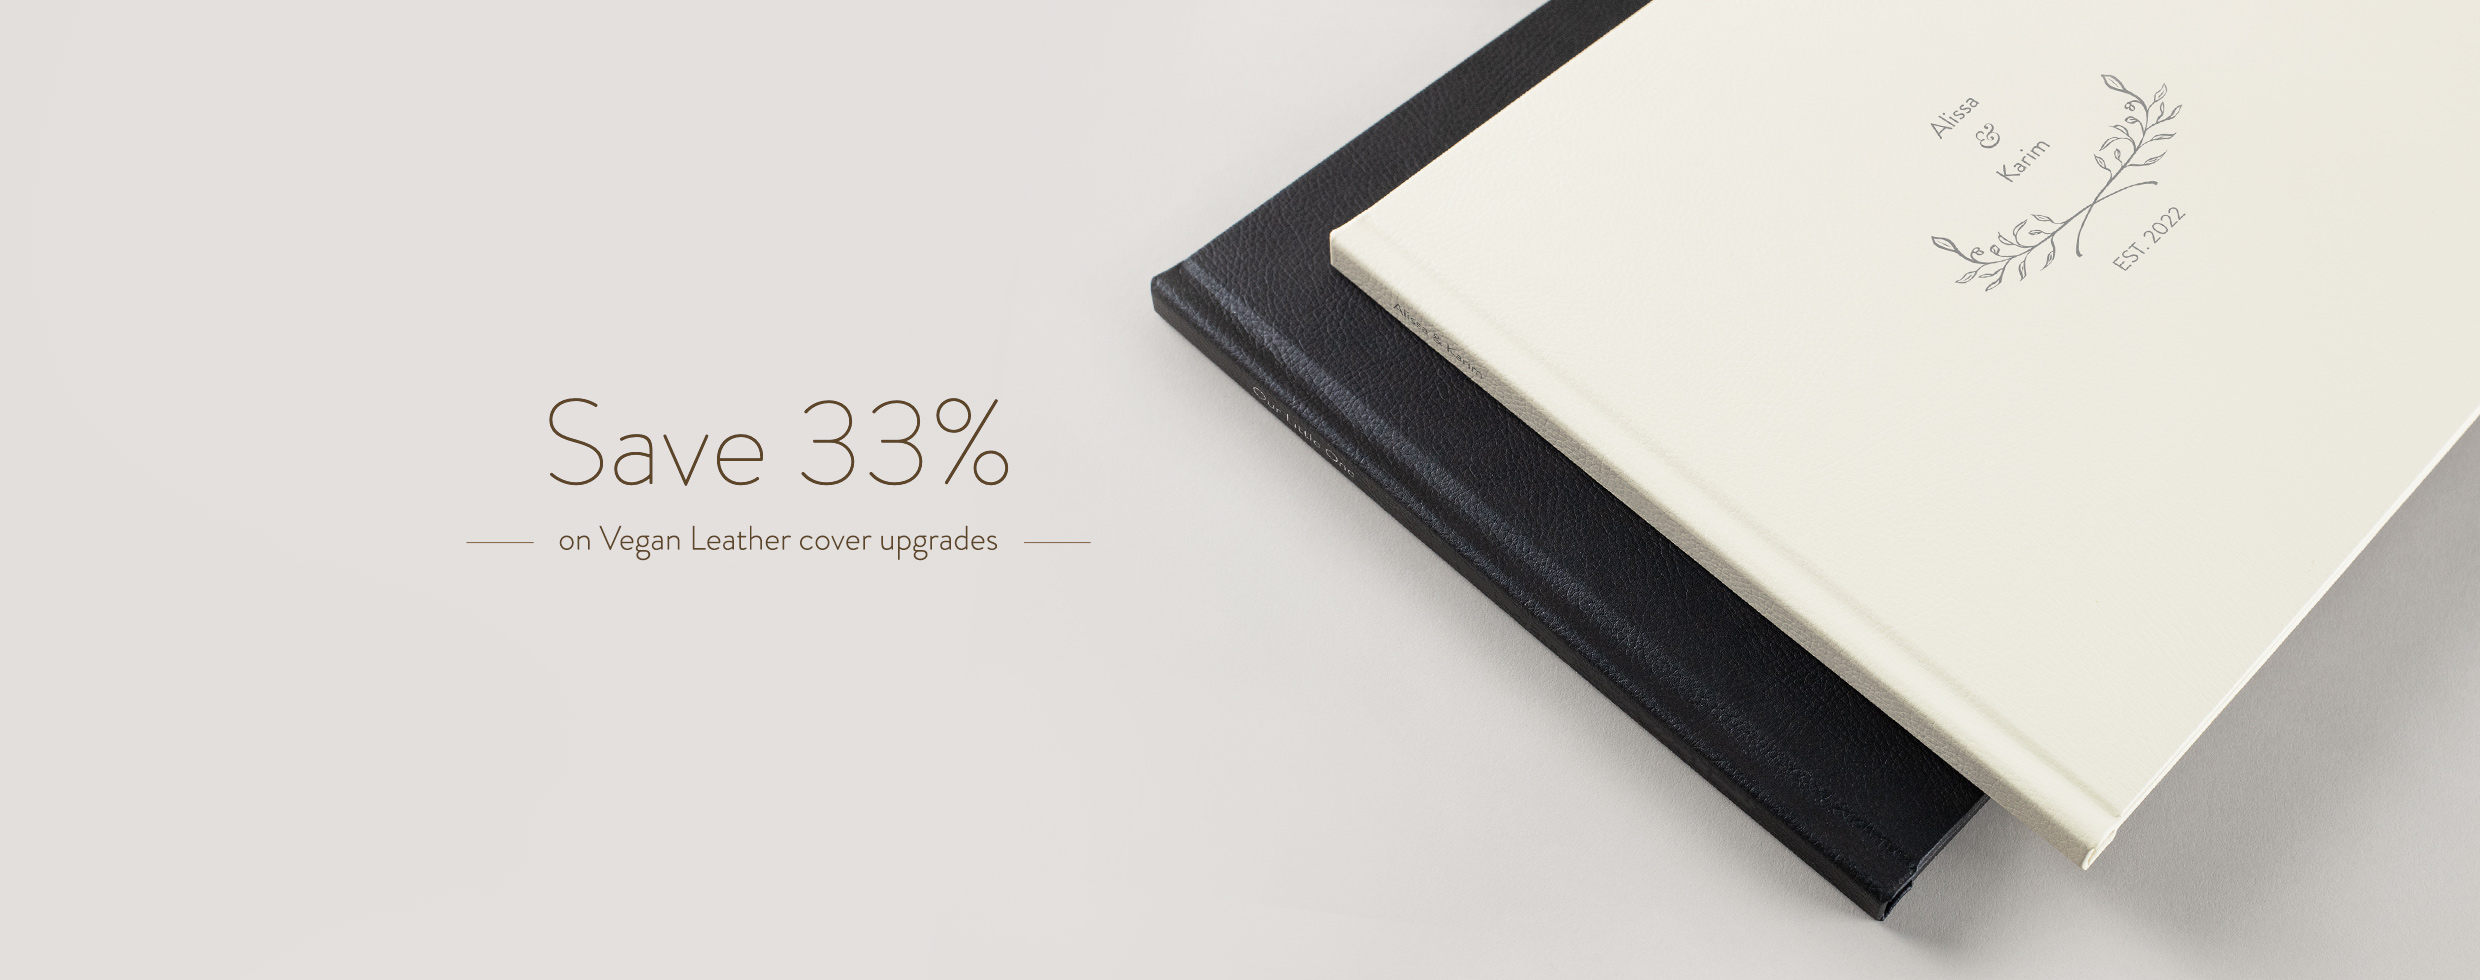 Save 33% on Vegan Leather Covers